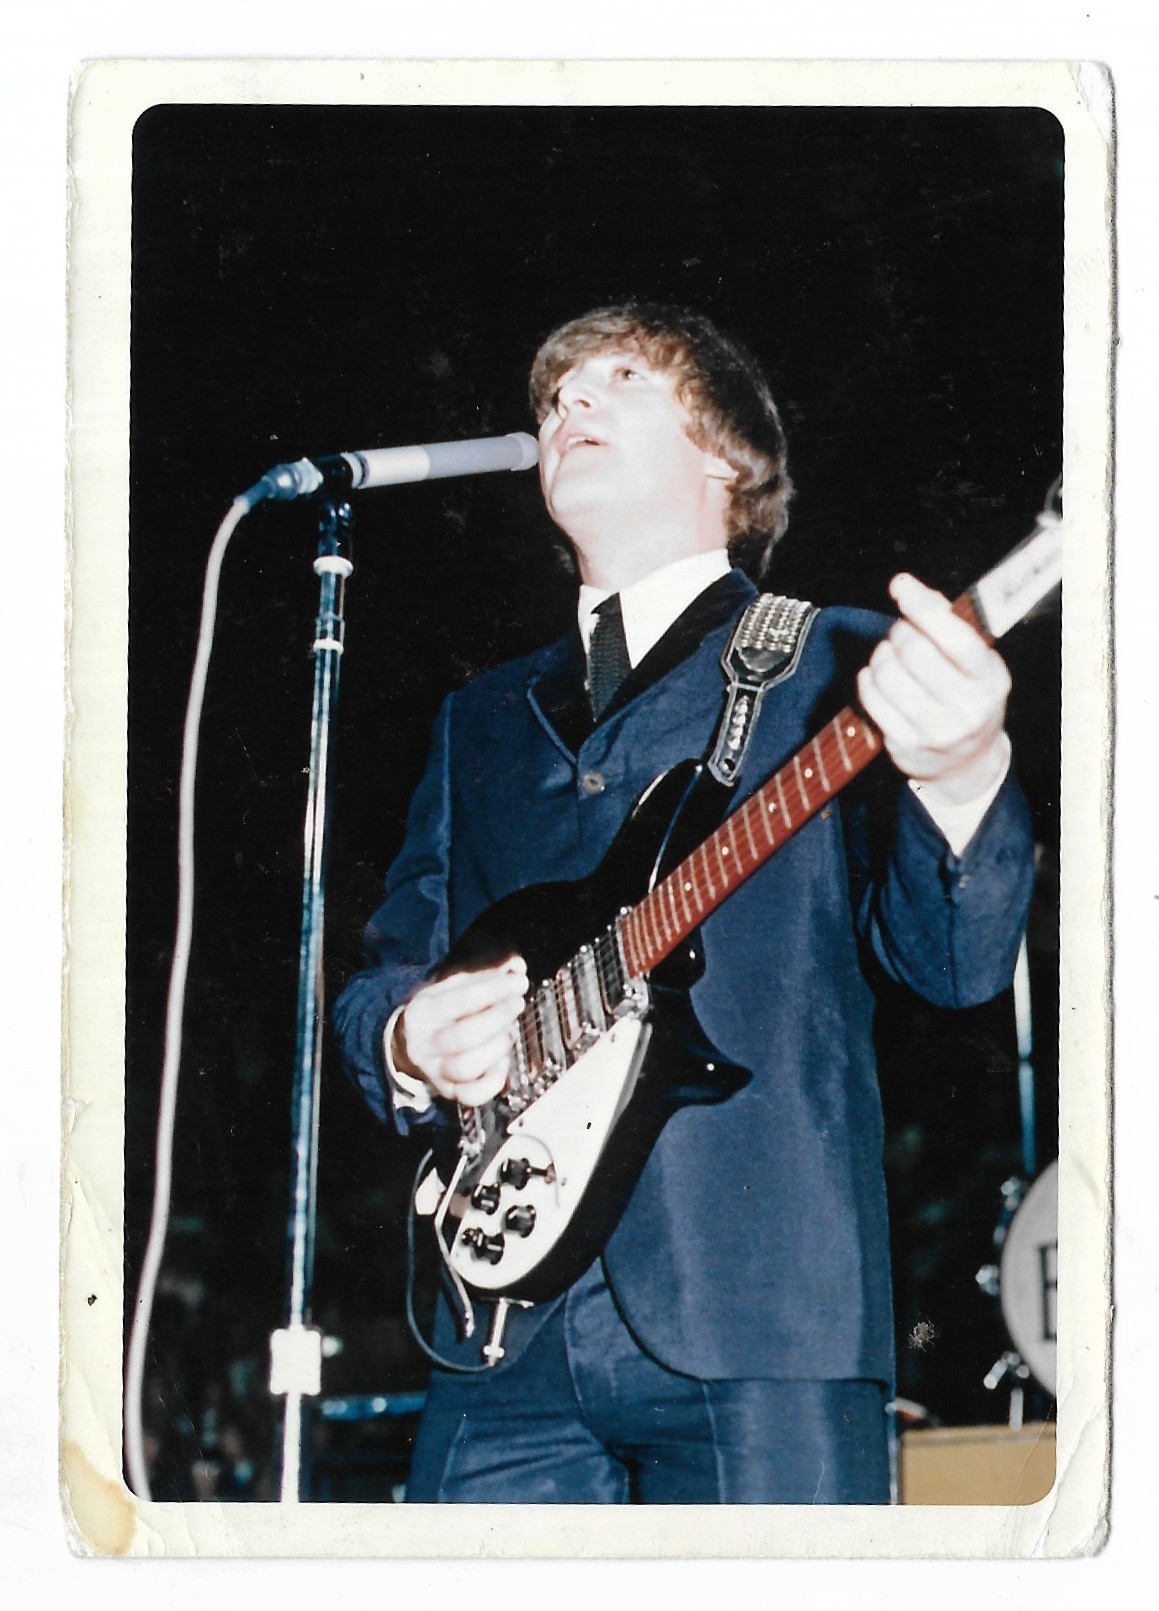 Two fan photographs of John Lennon playing live. These items are formerly the property of Beatles - Image 2 of 2